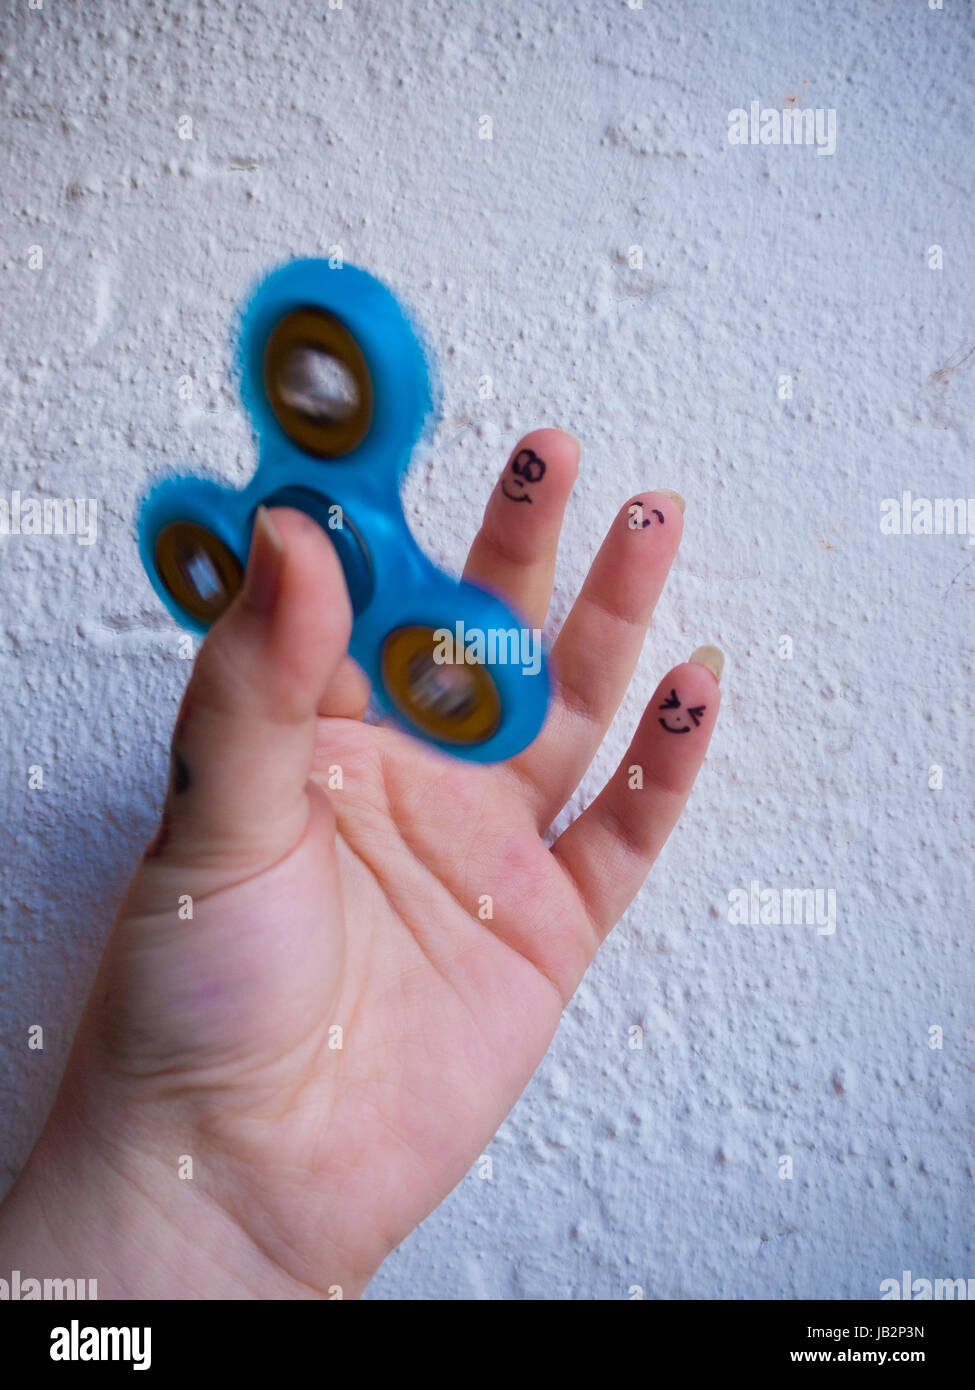 A moving fidget spinner in a hand with different smiling faces on the last three fingers Stock Photo